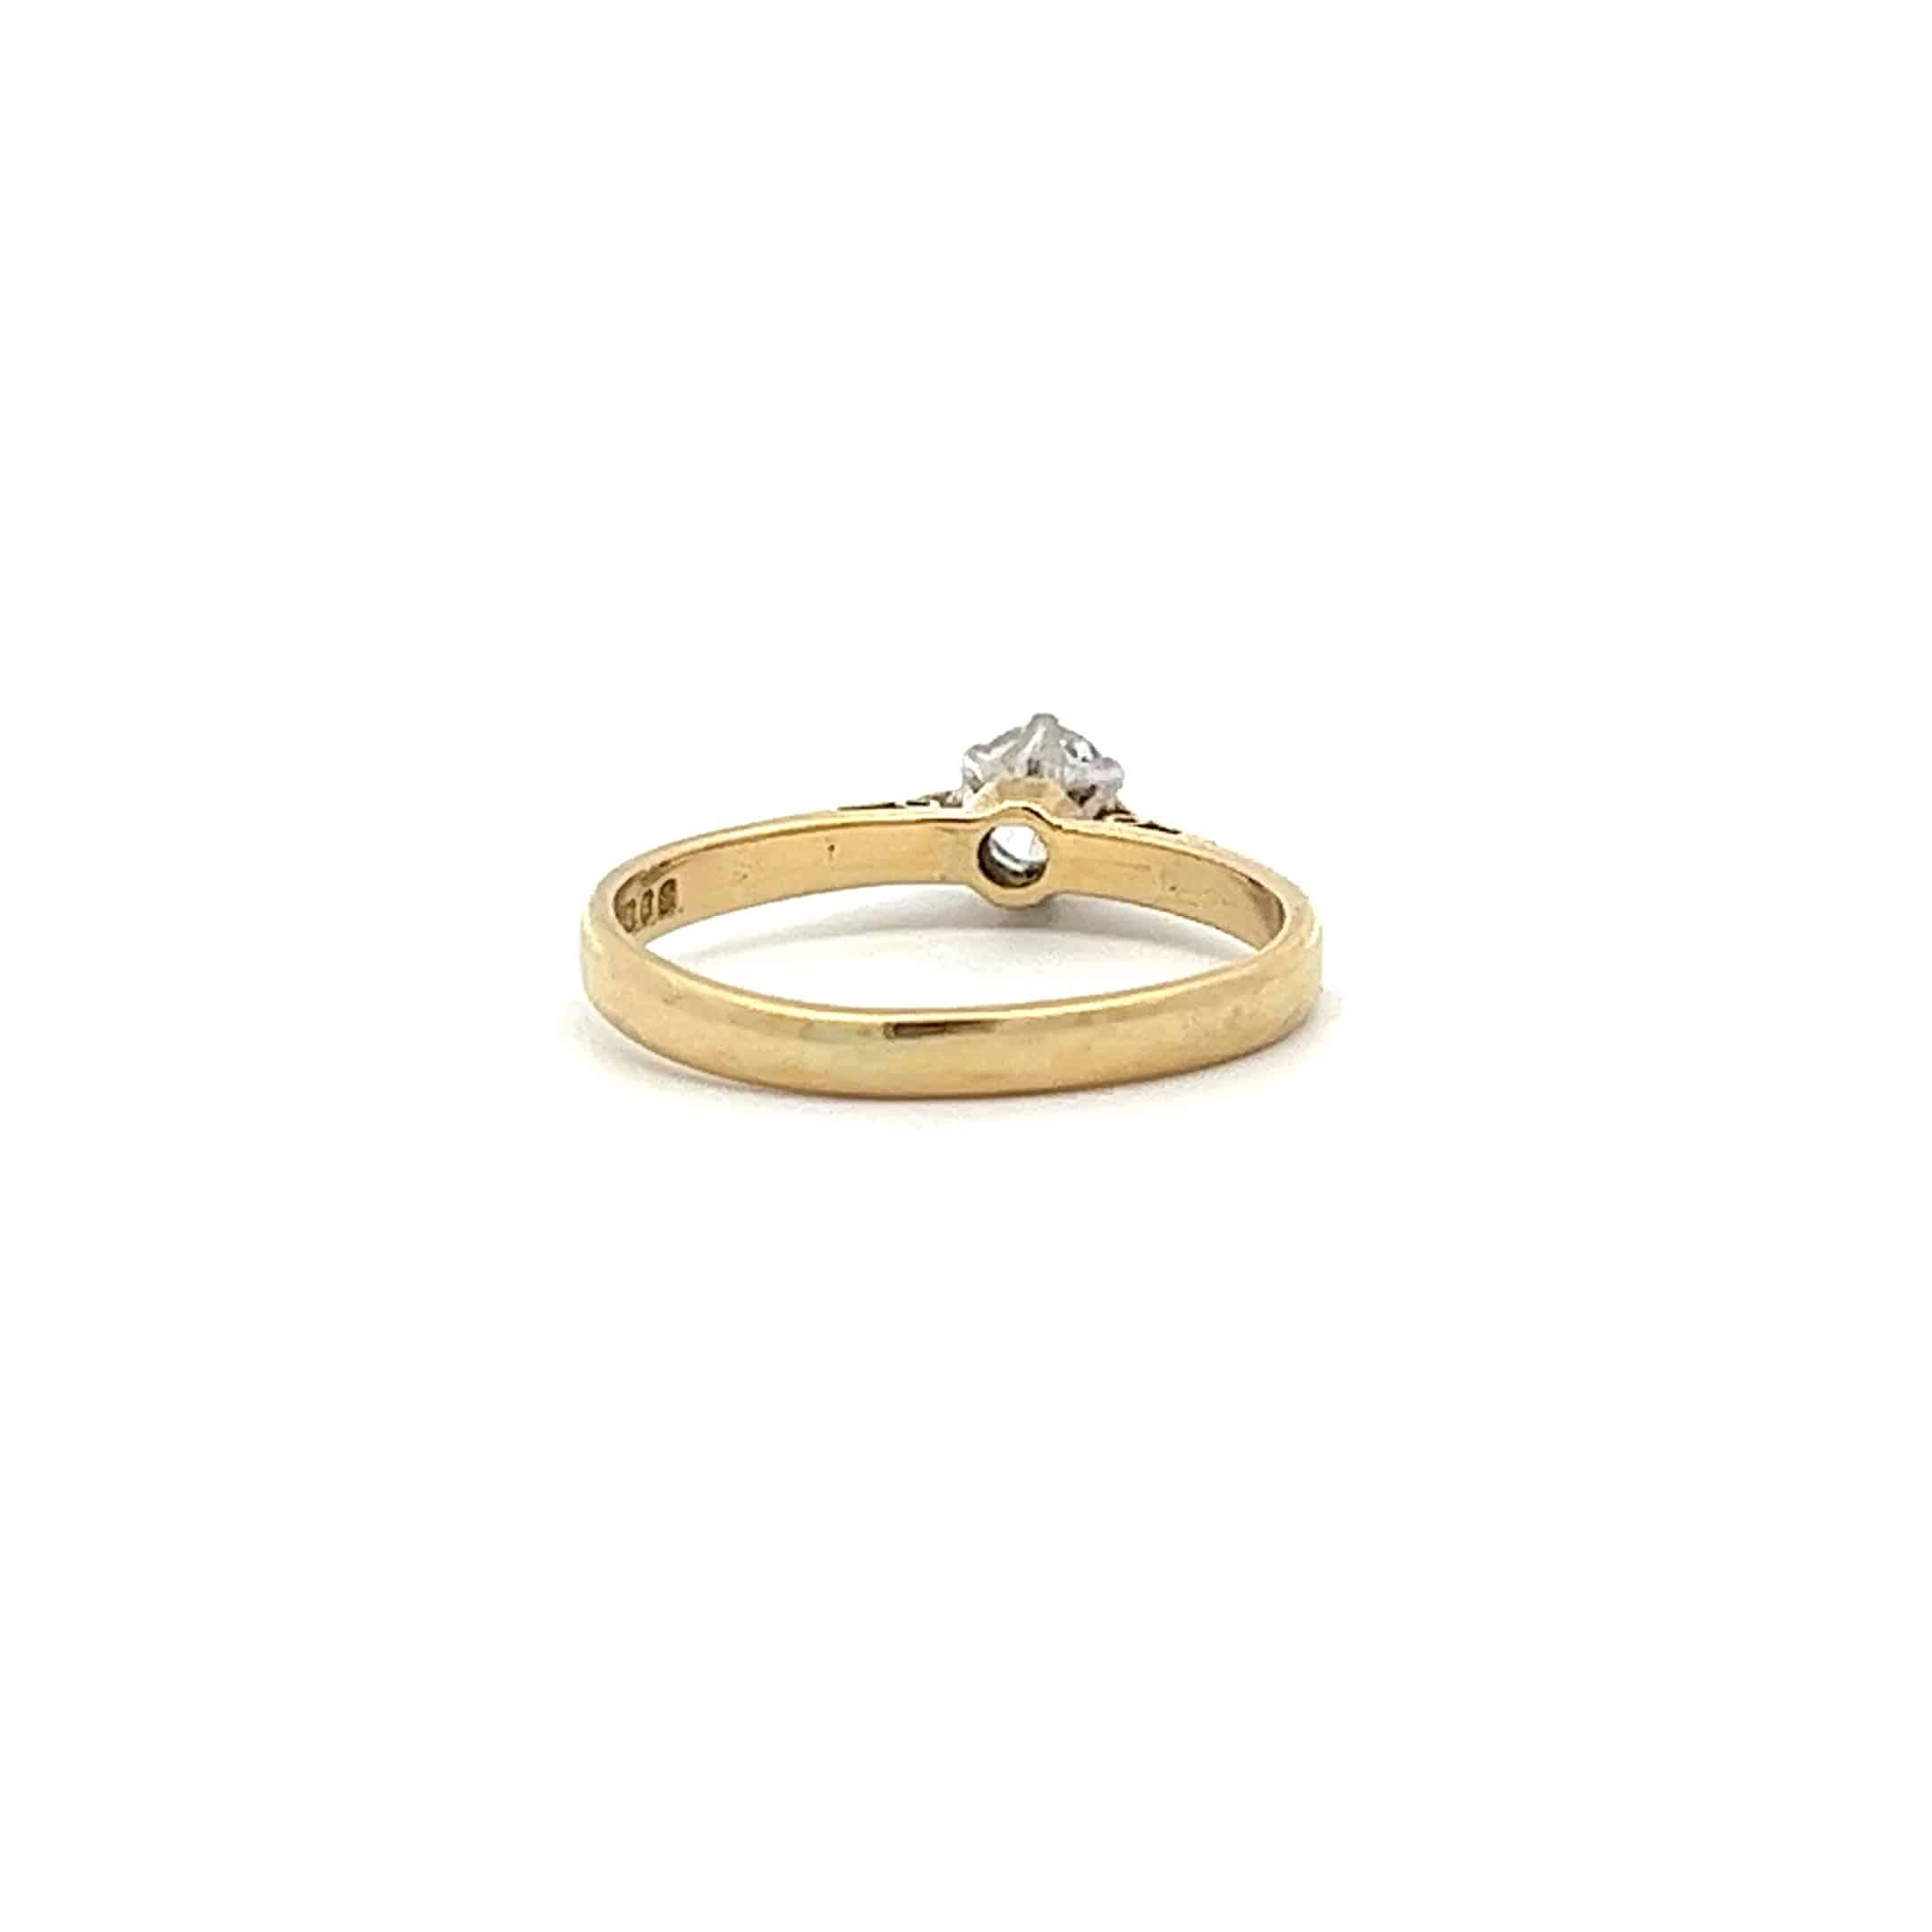 0.25ct Assessed Brilliant Cut Diamond Solitaire Ring in 18ct Gold – Pre-Owned